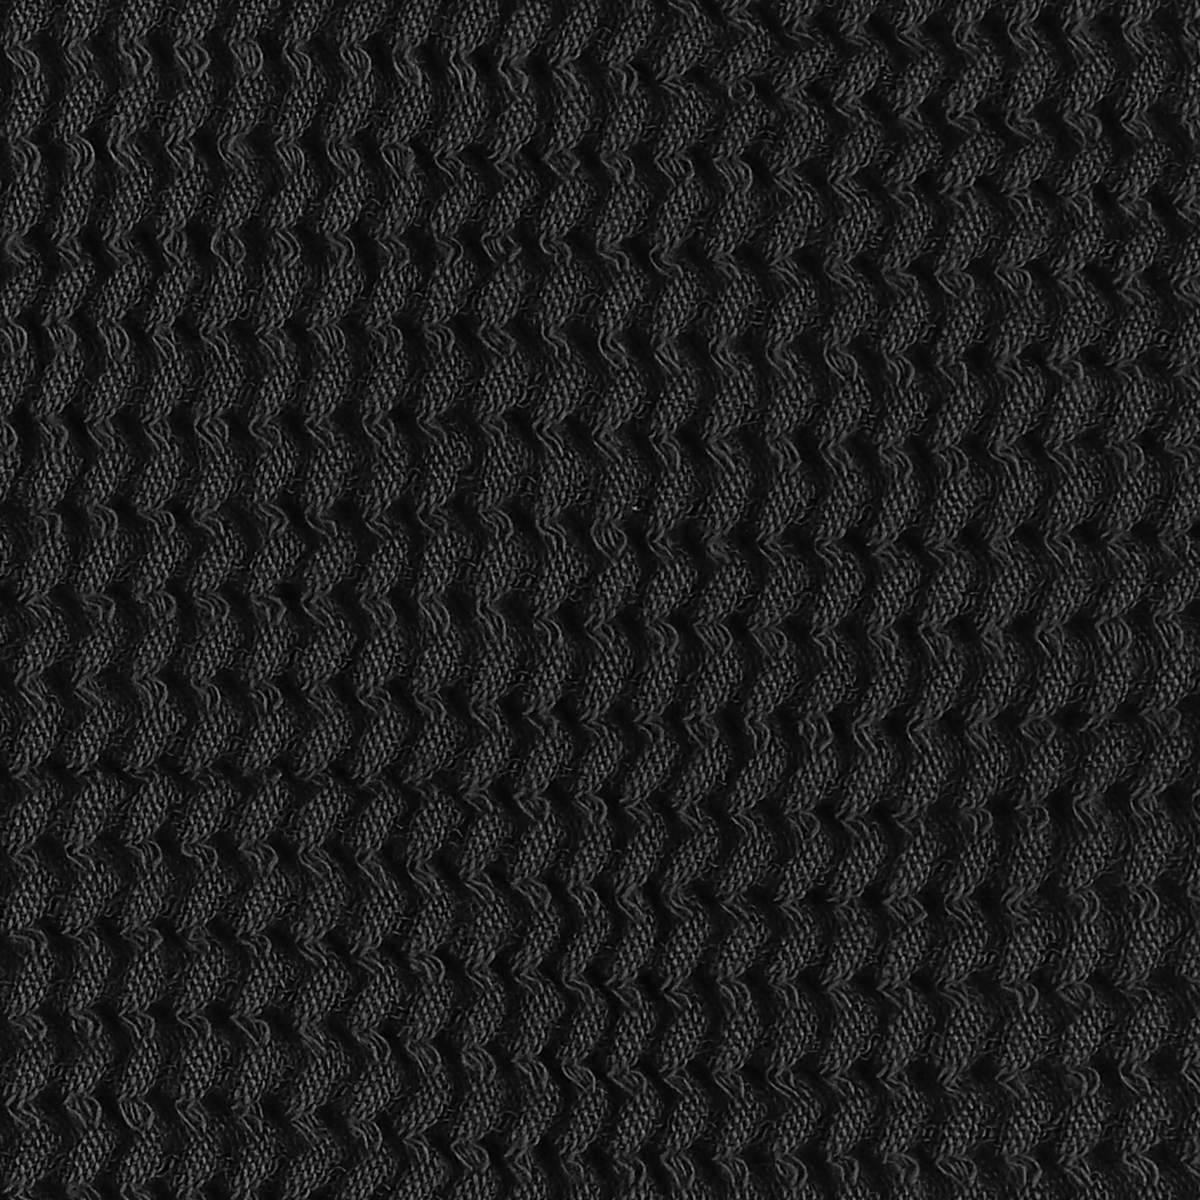 Swatch Sample of Matouk Kiran Waffle Towels in Carbon Color